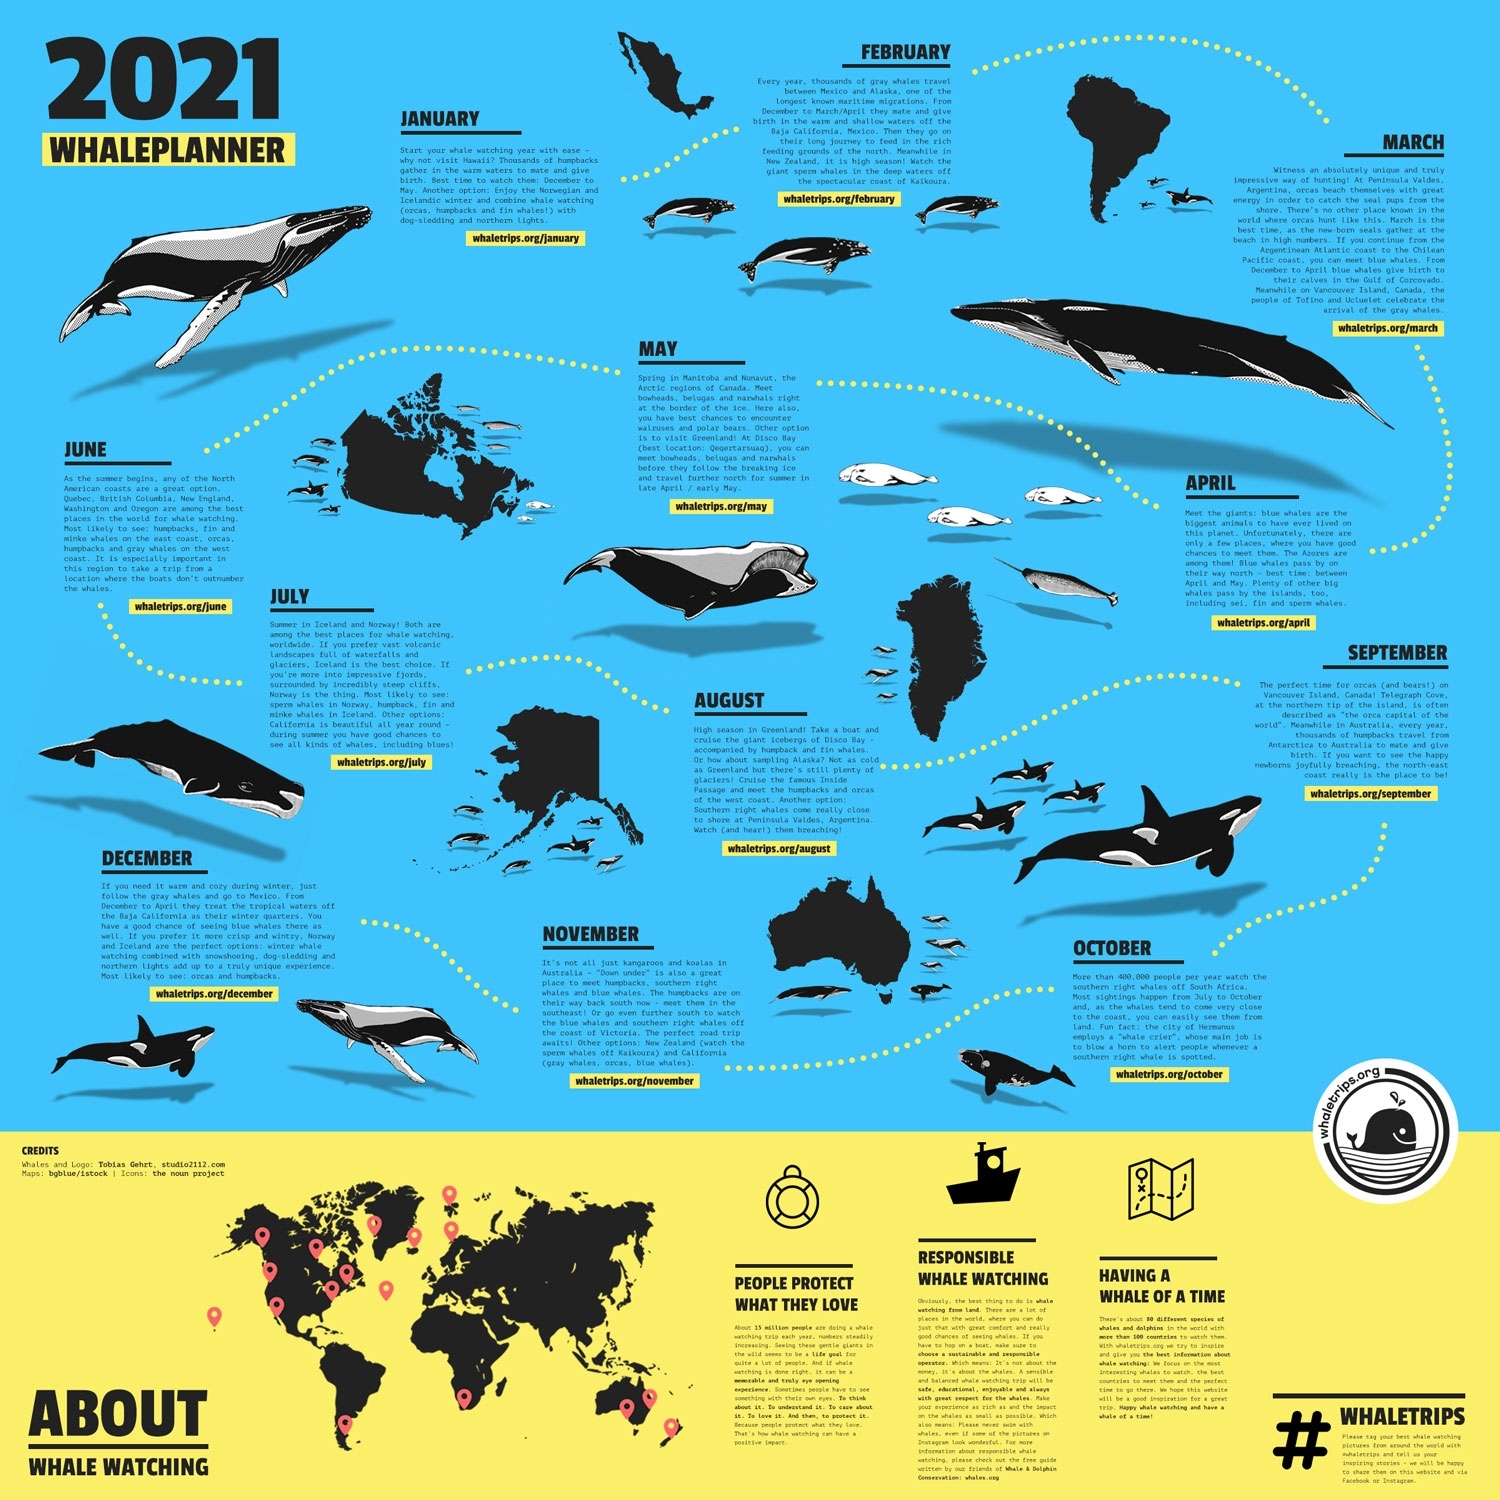 The Whale Planner 2021: Whale Watching Infographic | Whaletrips How Long Until December 2021